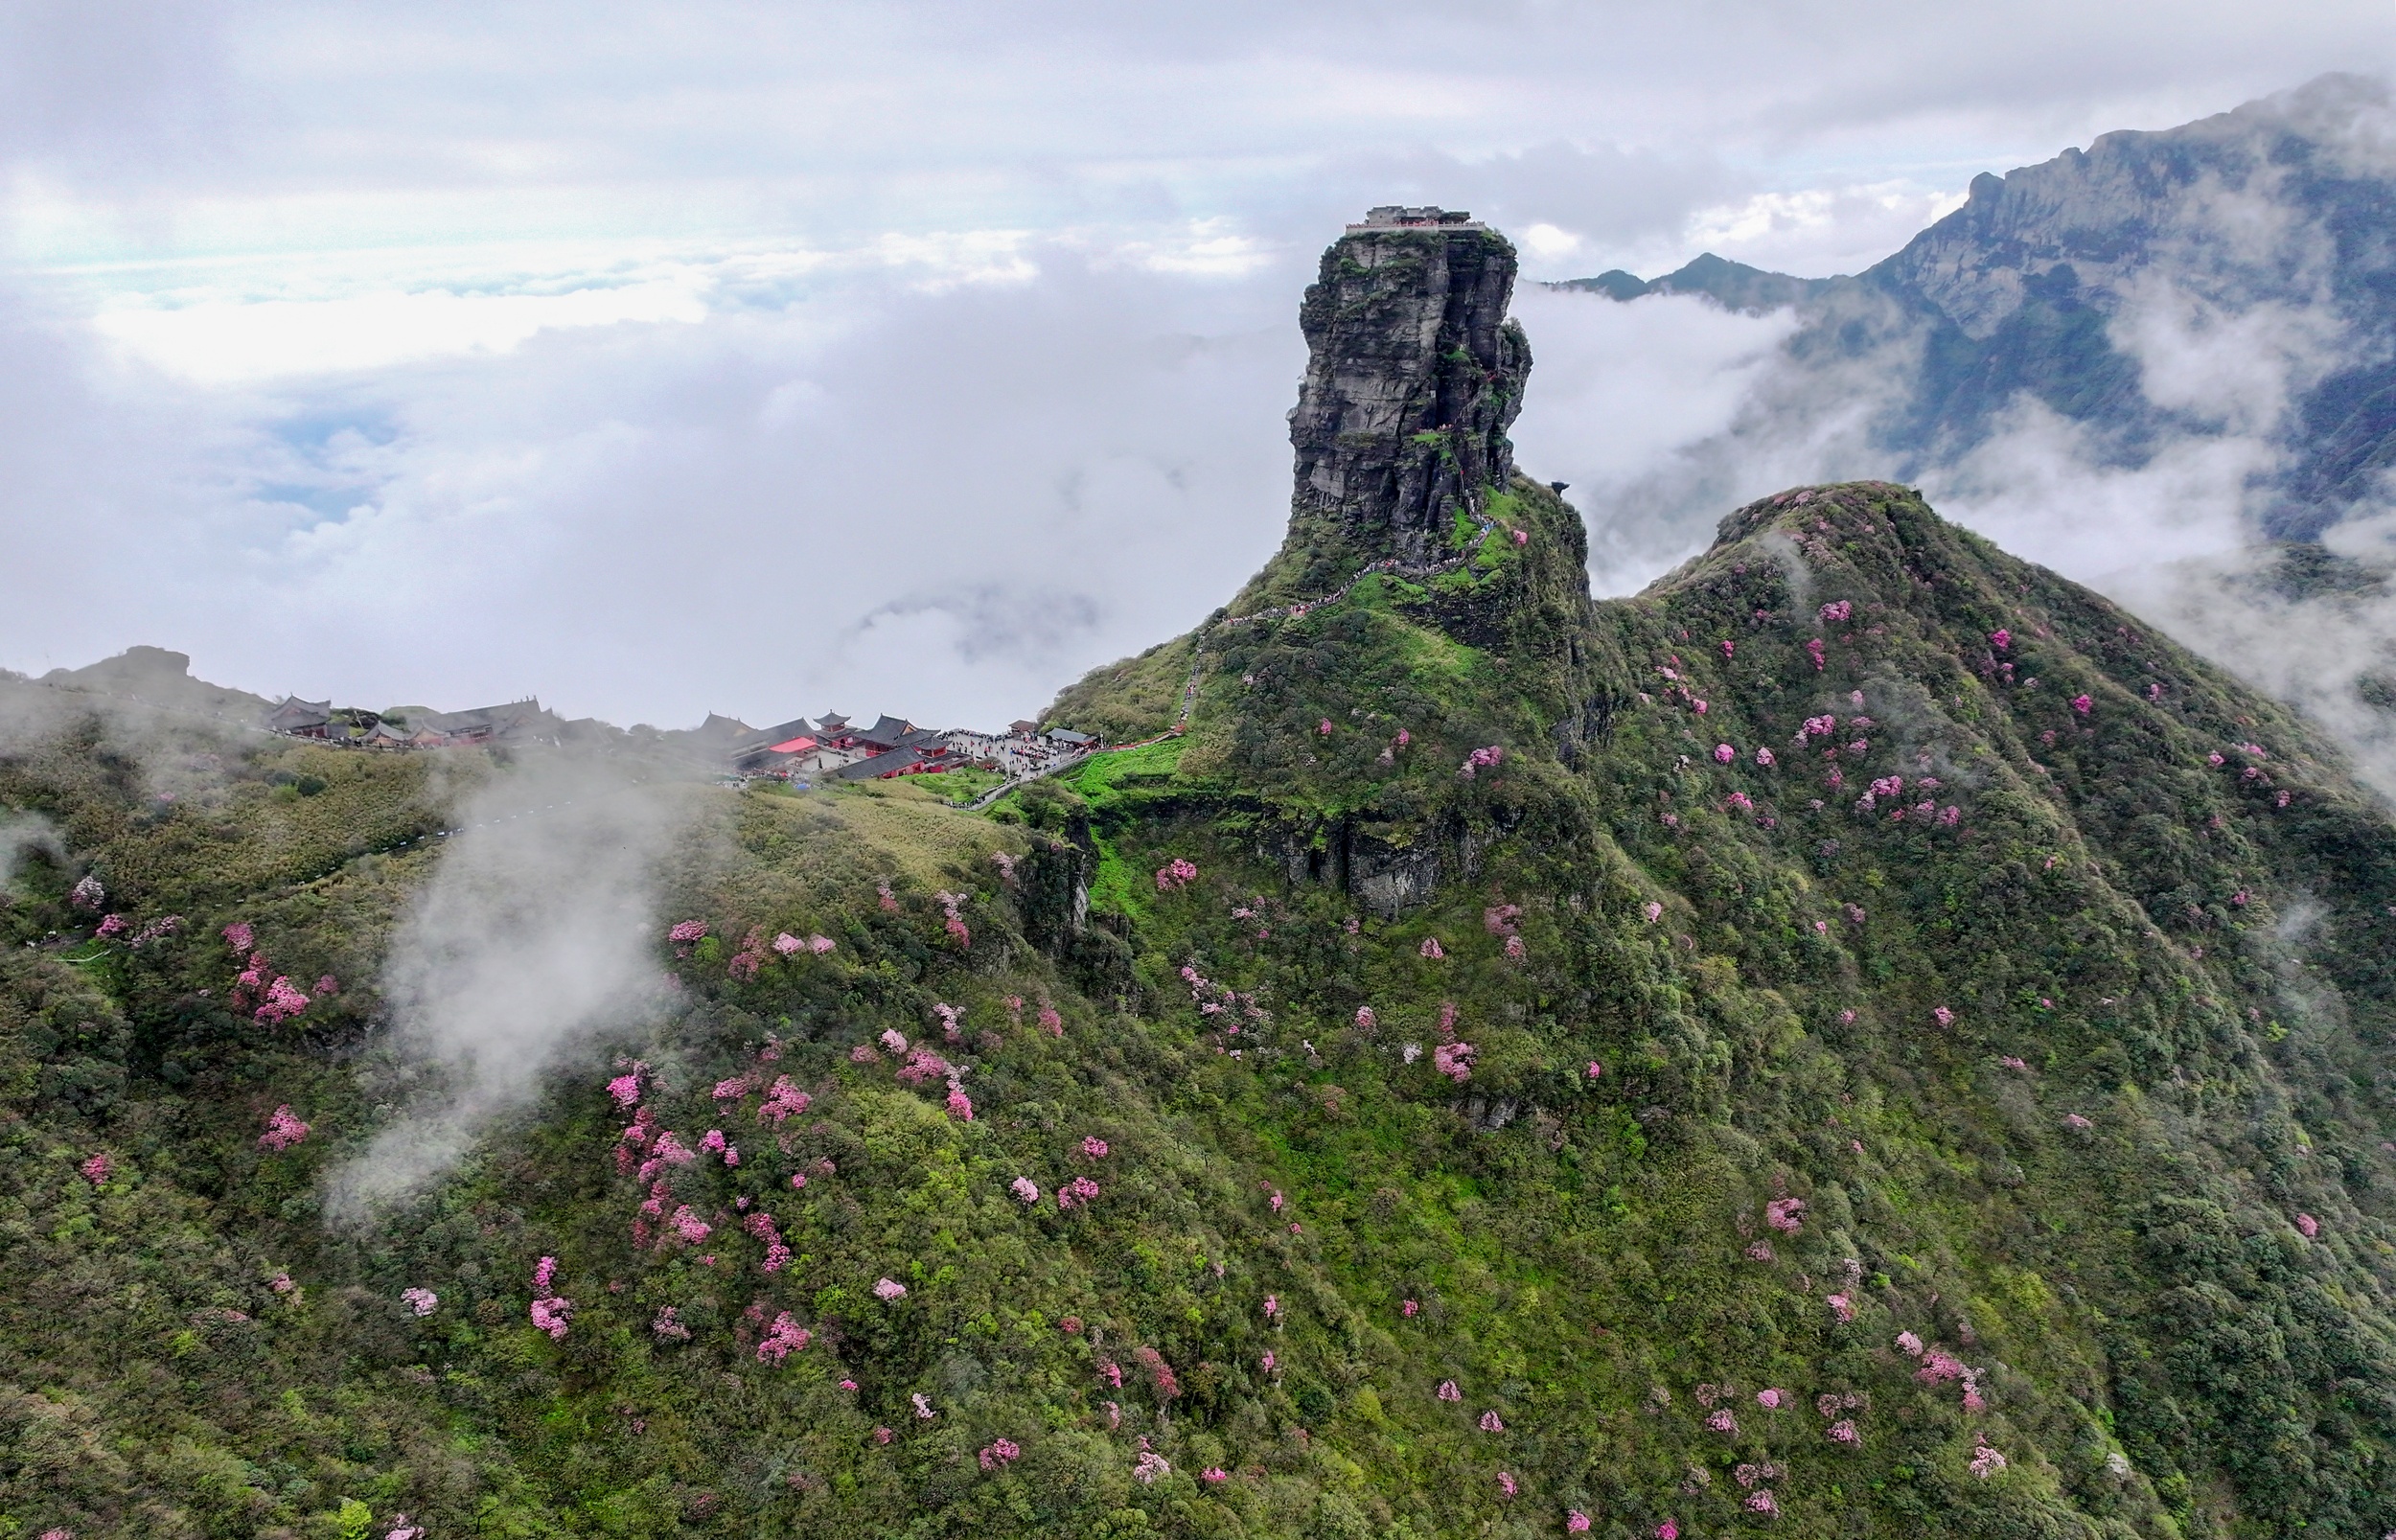 Blooming azalea flowers adorn Mount Fanjing in southwest China's Guizhou Province in this undated photo. /Photo provided to CGTN